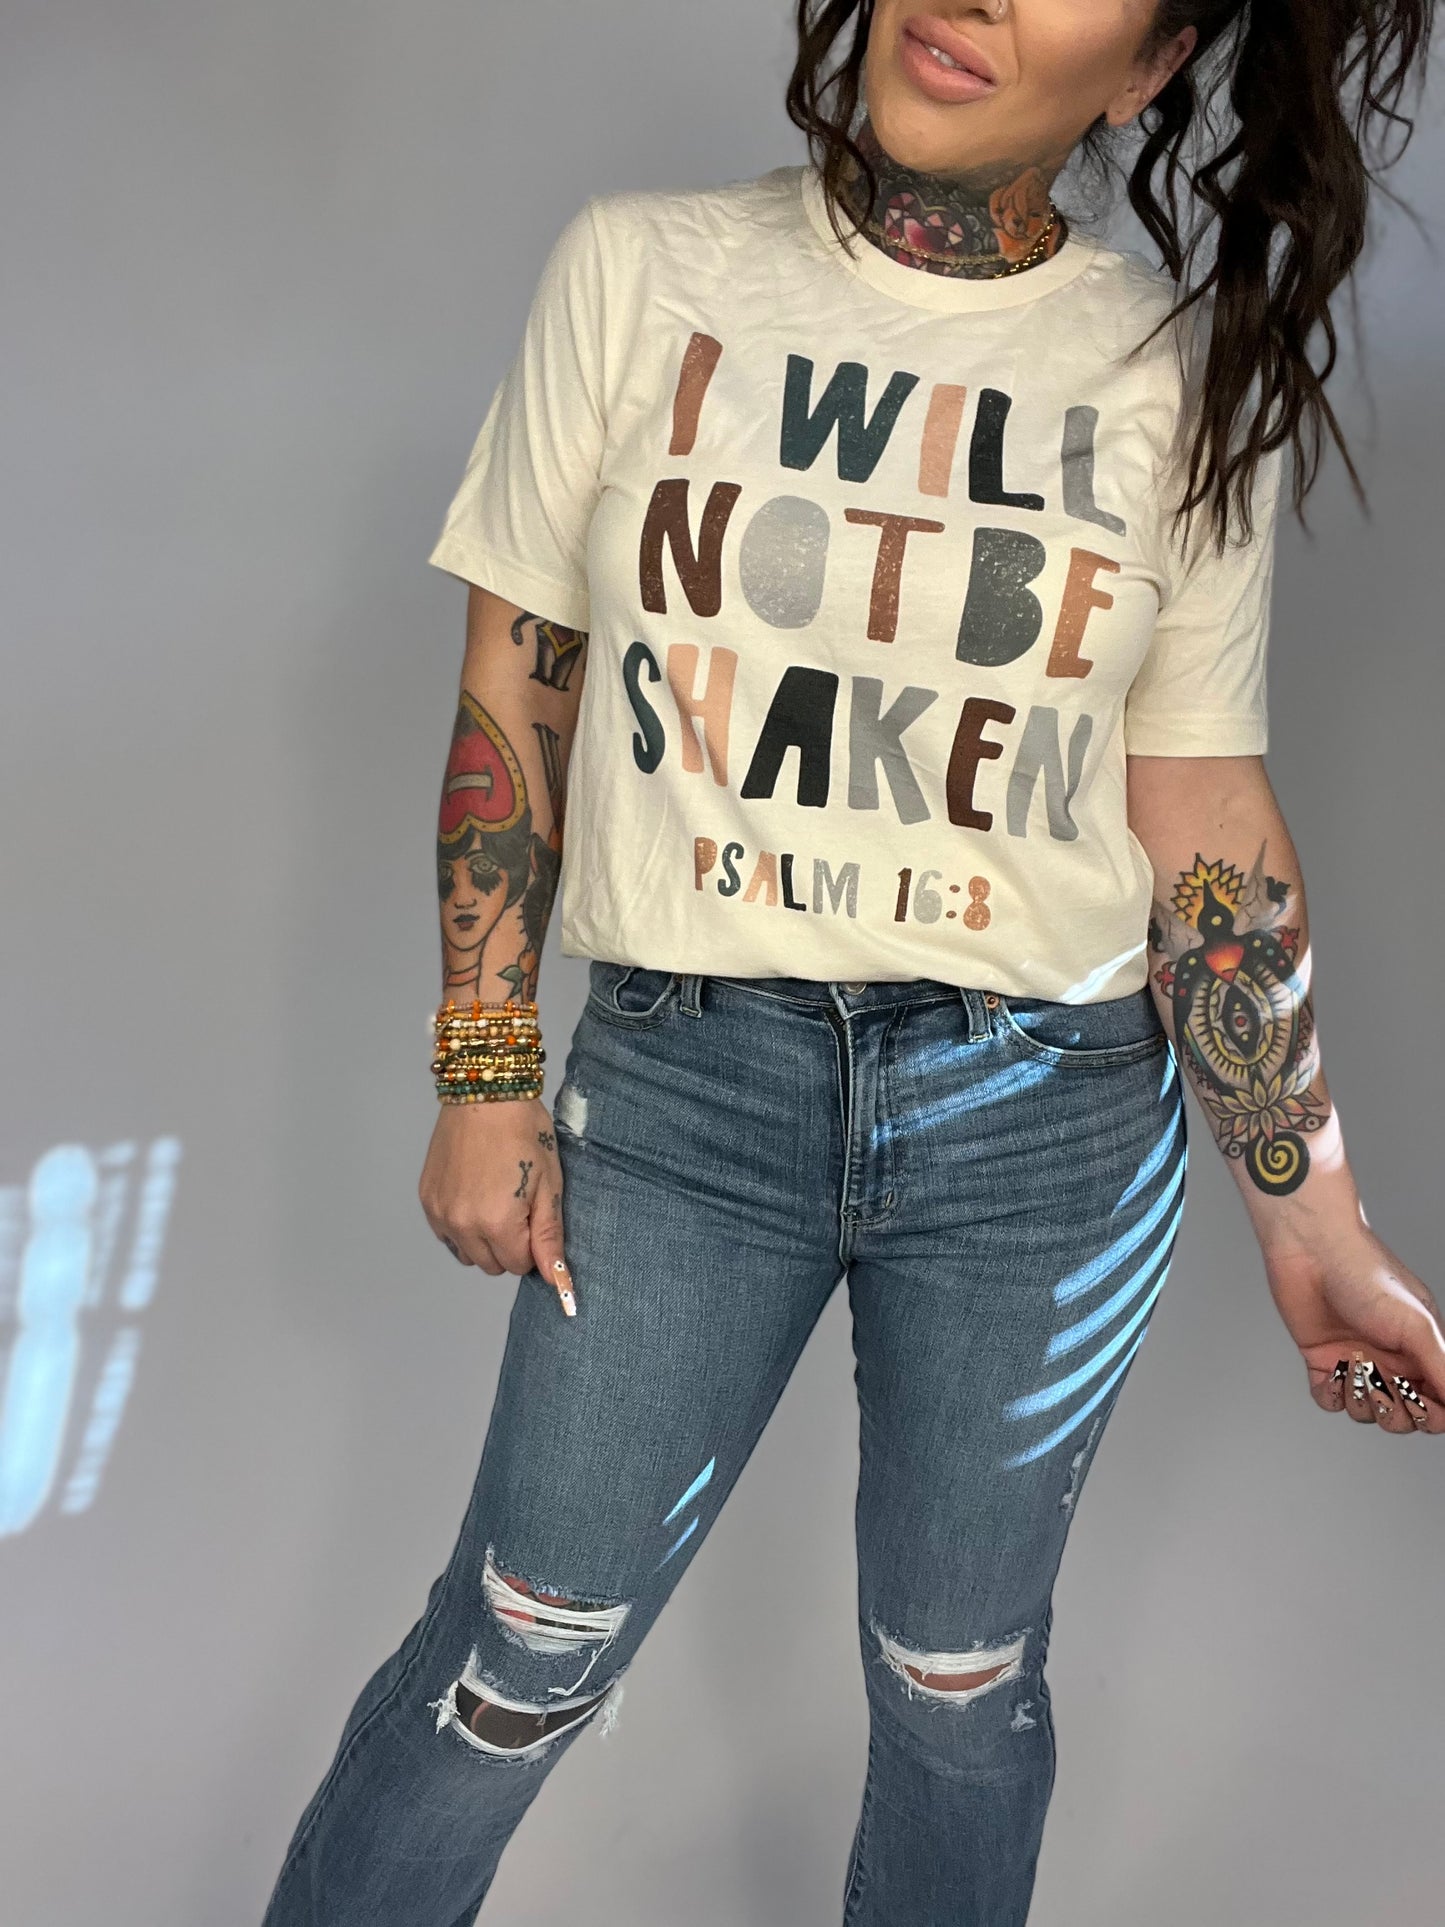 CURVY - I Will Not Be Shaken Easter PLUS SIZE Graphic Tee (MULTIPLE COLORS) - BP